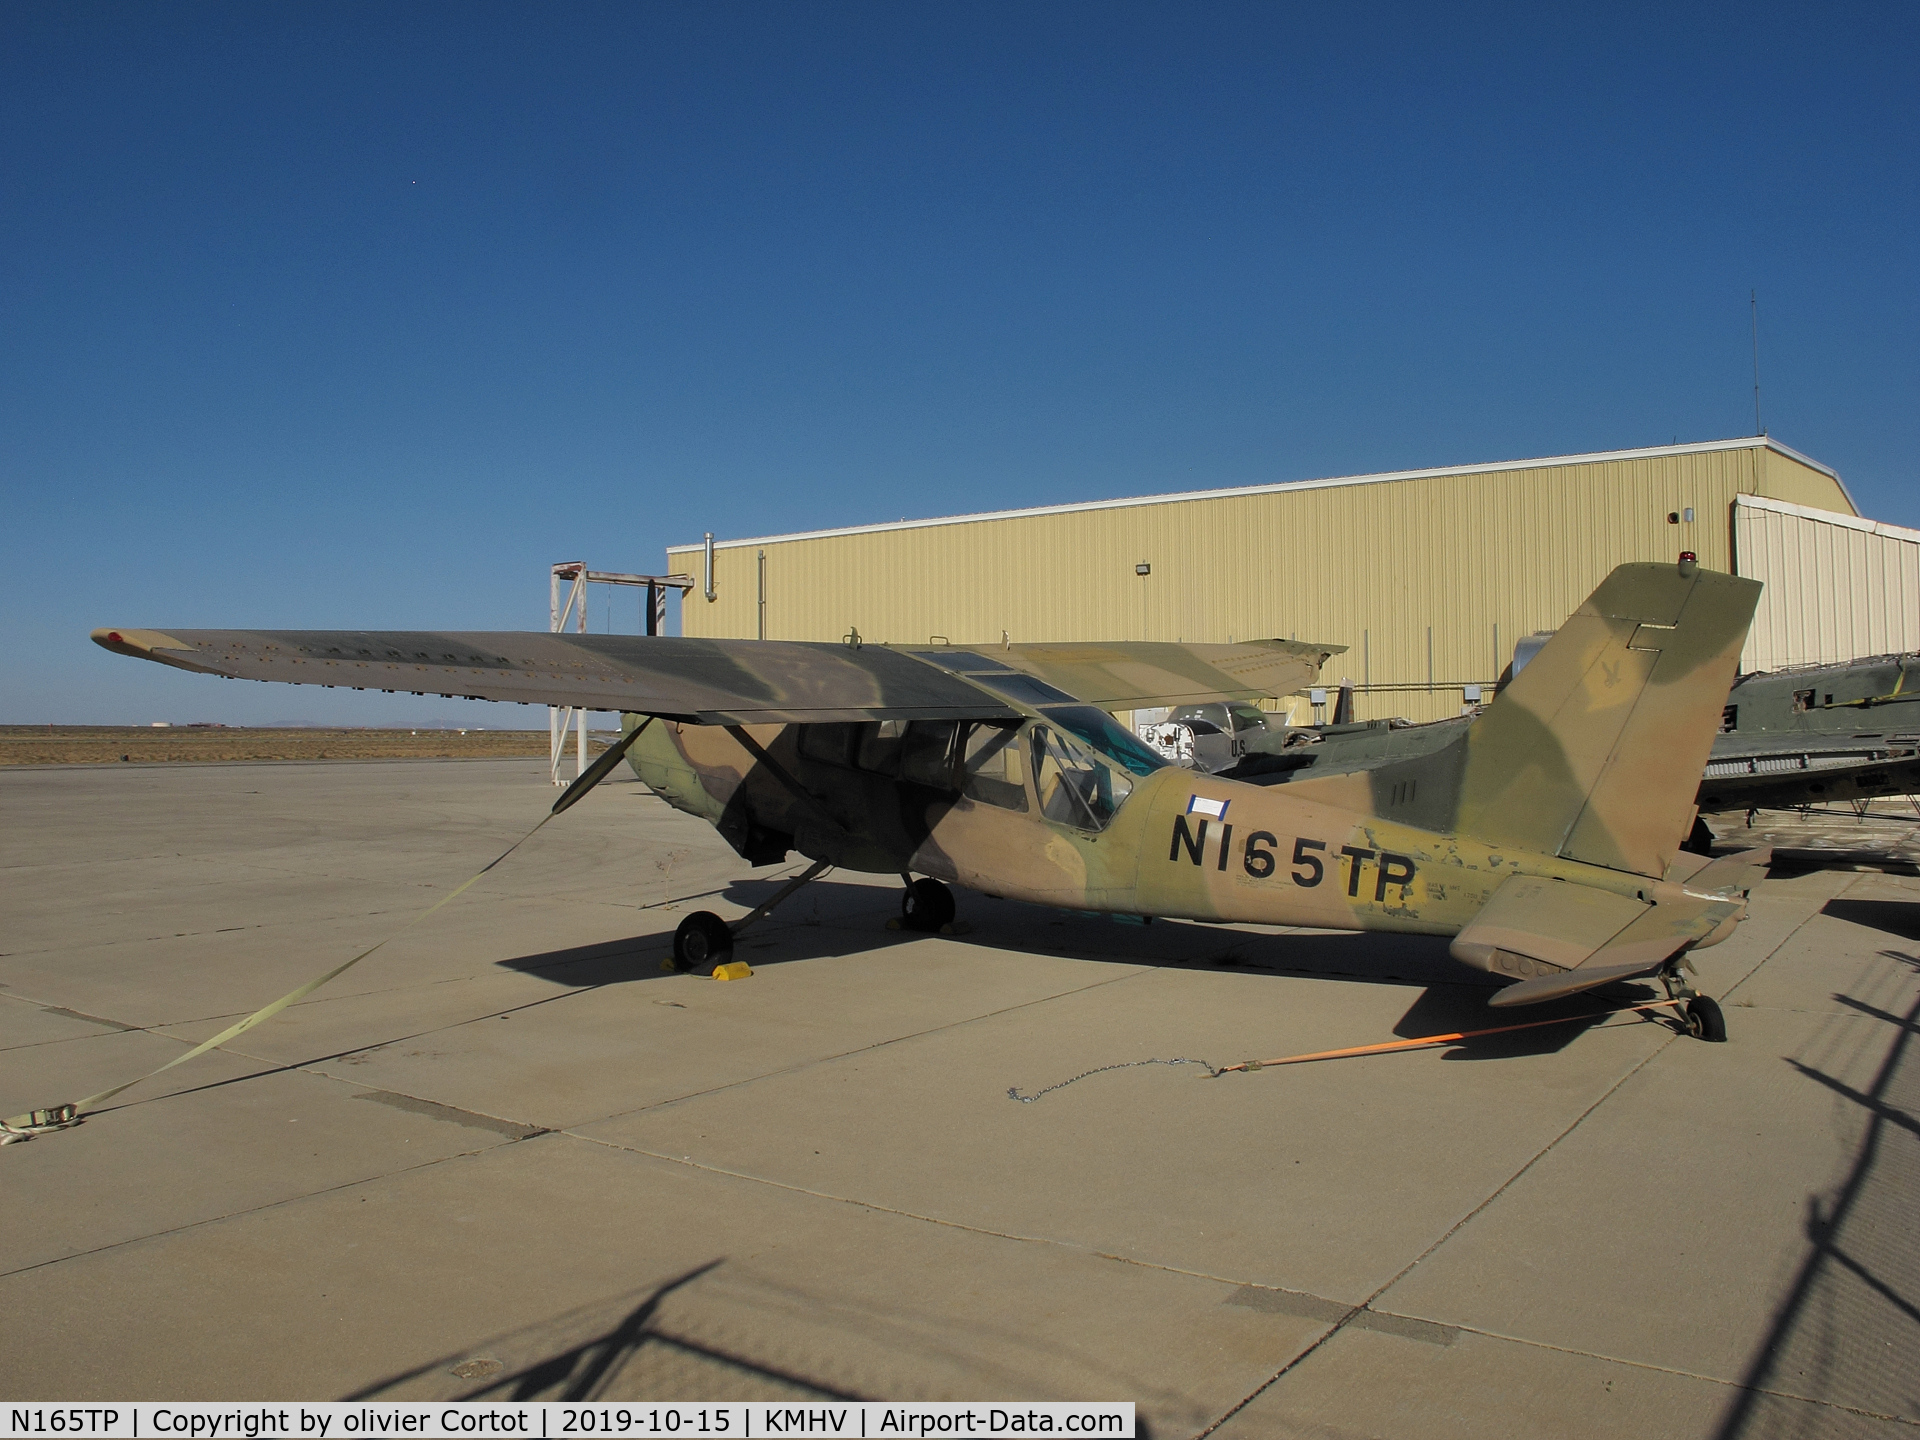 N165TP, 1974 Aermacchi AM-3C Bosbok C/N 2028, unexpected discover in the Mojave desert